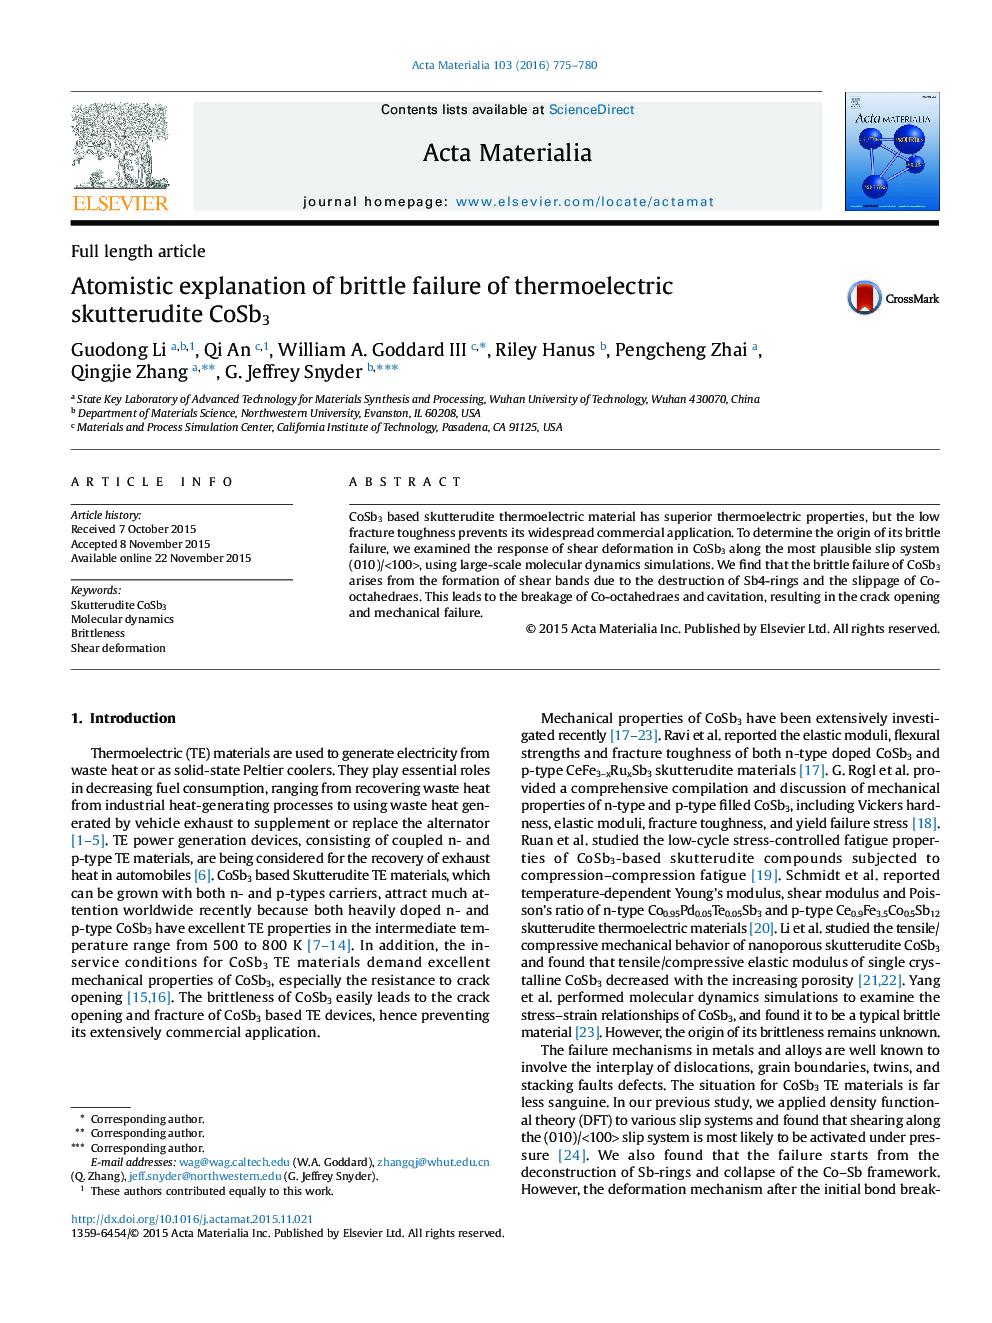 Atomistic explanation of brittle failure of thermoelectric skutterudite CoSb3